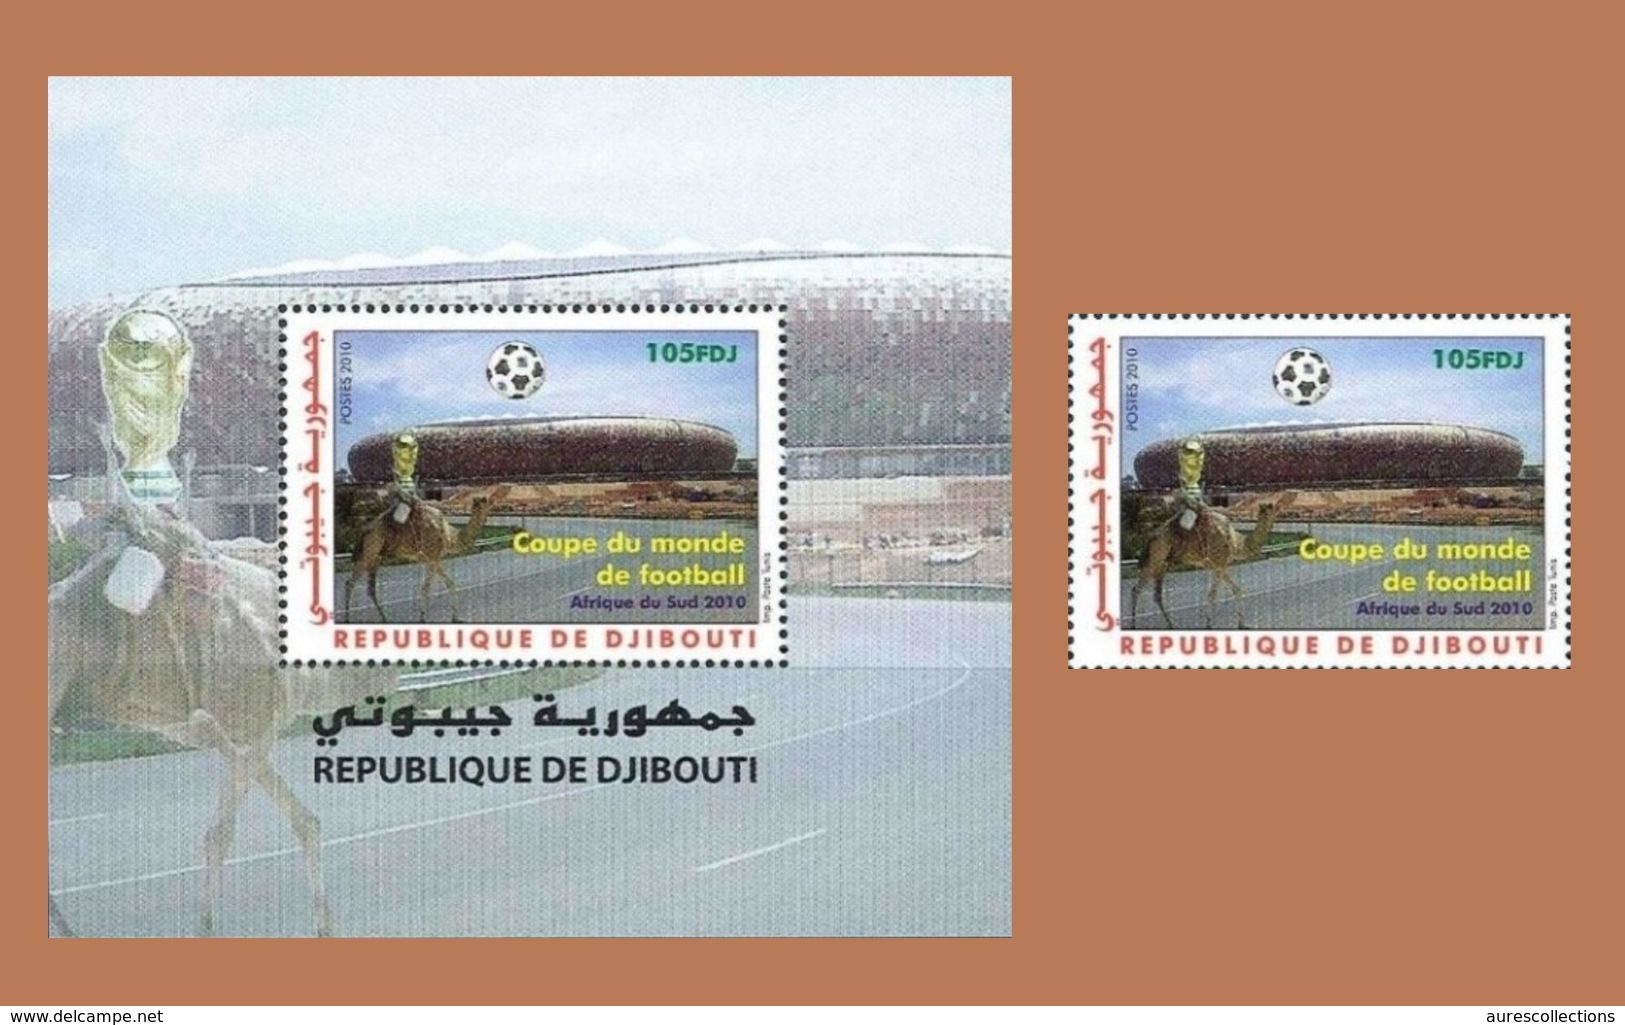 DJIBOUTI 2010 - SOUTH AFRICA SOCCER WORLD CUP COUPE DU MONDE FOOTBALL BLOC S/S SHEET + 1 VAL ULTRA RARE - MNH ** - 2010 – África Del Sur